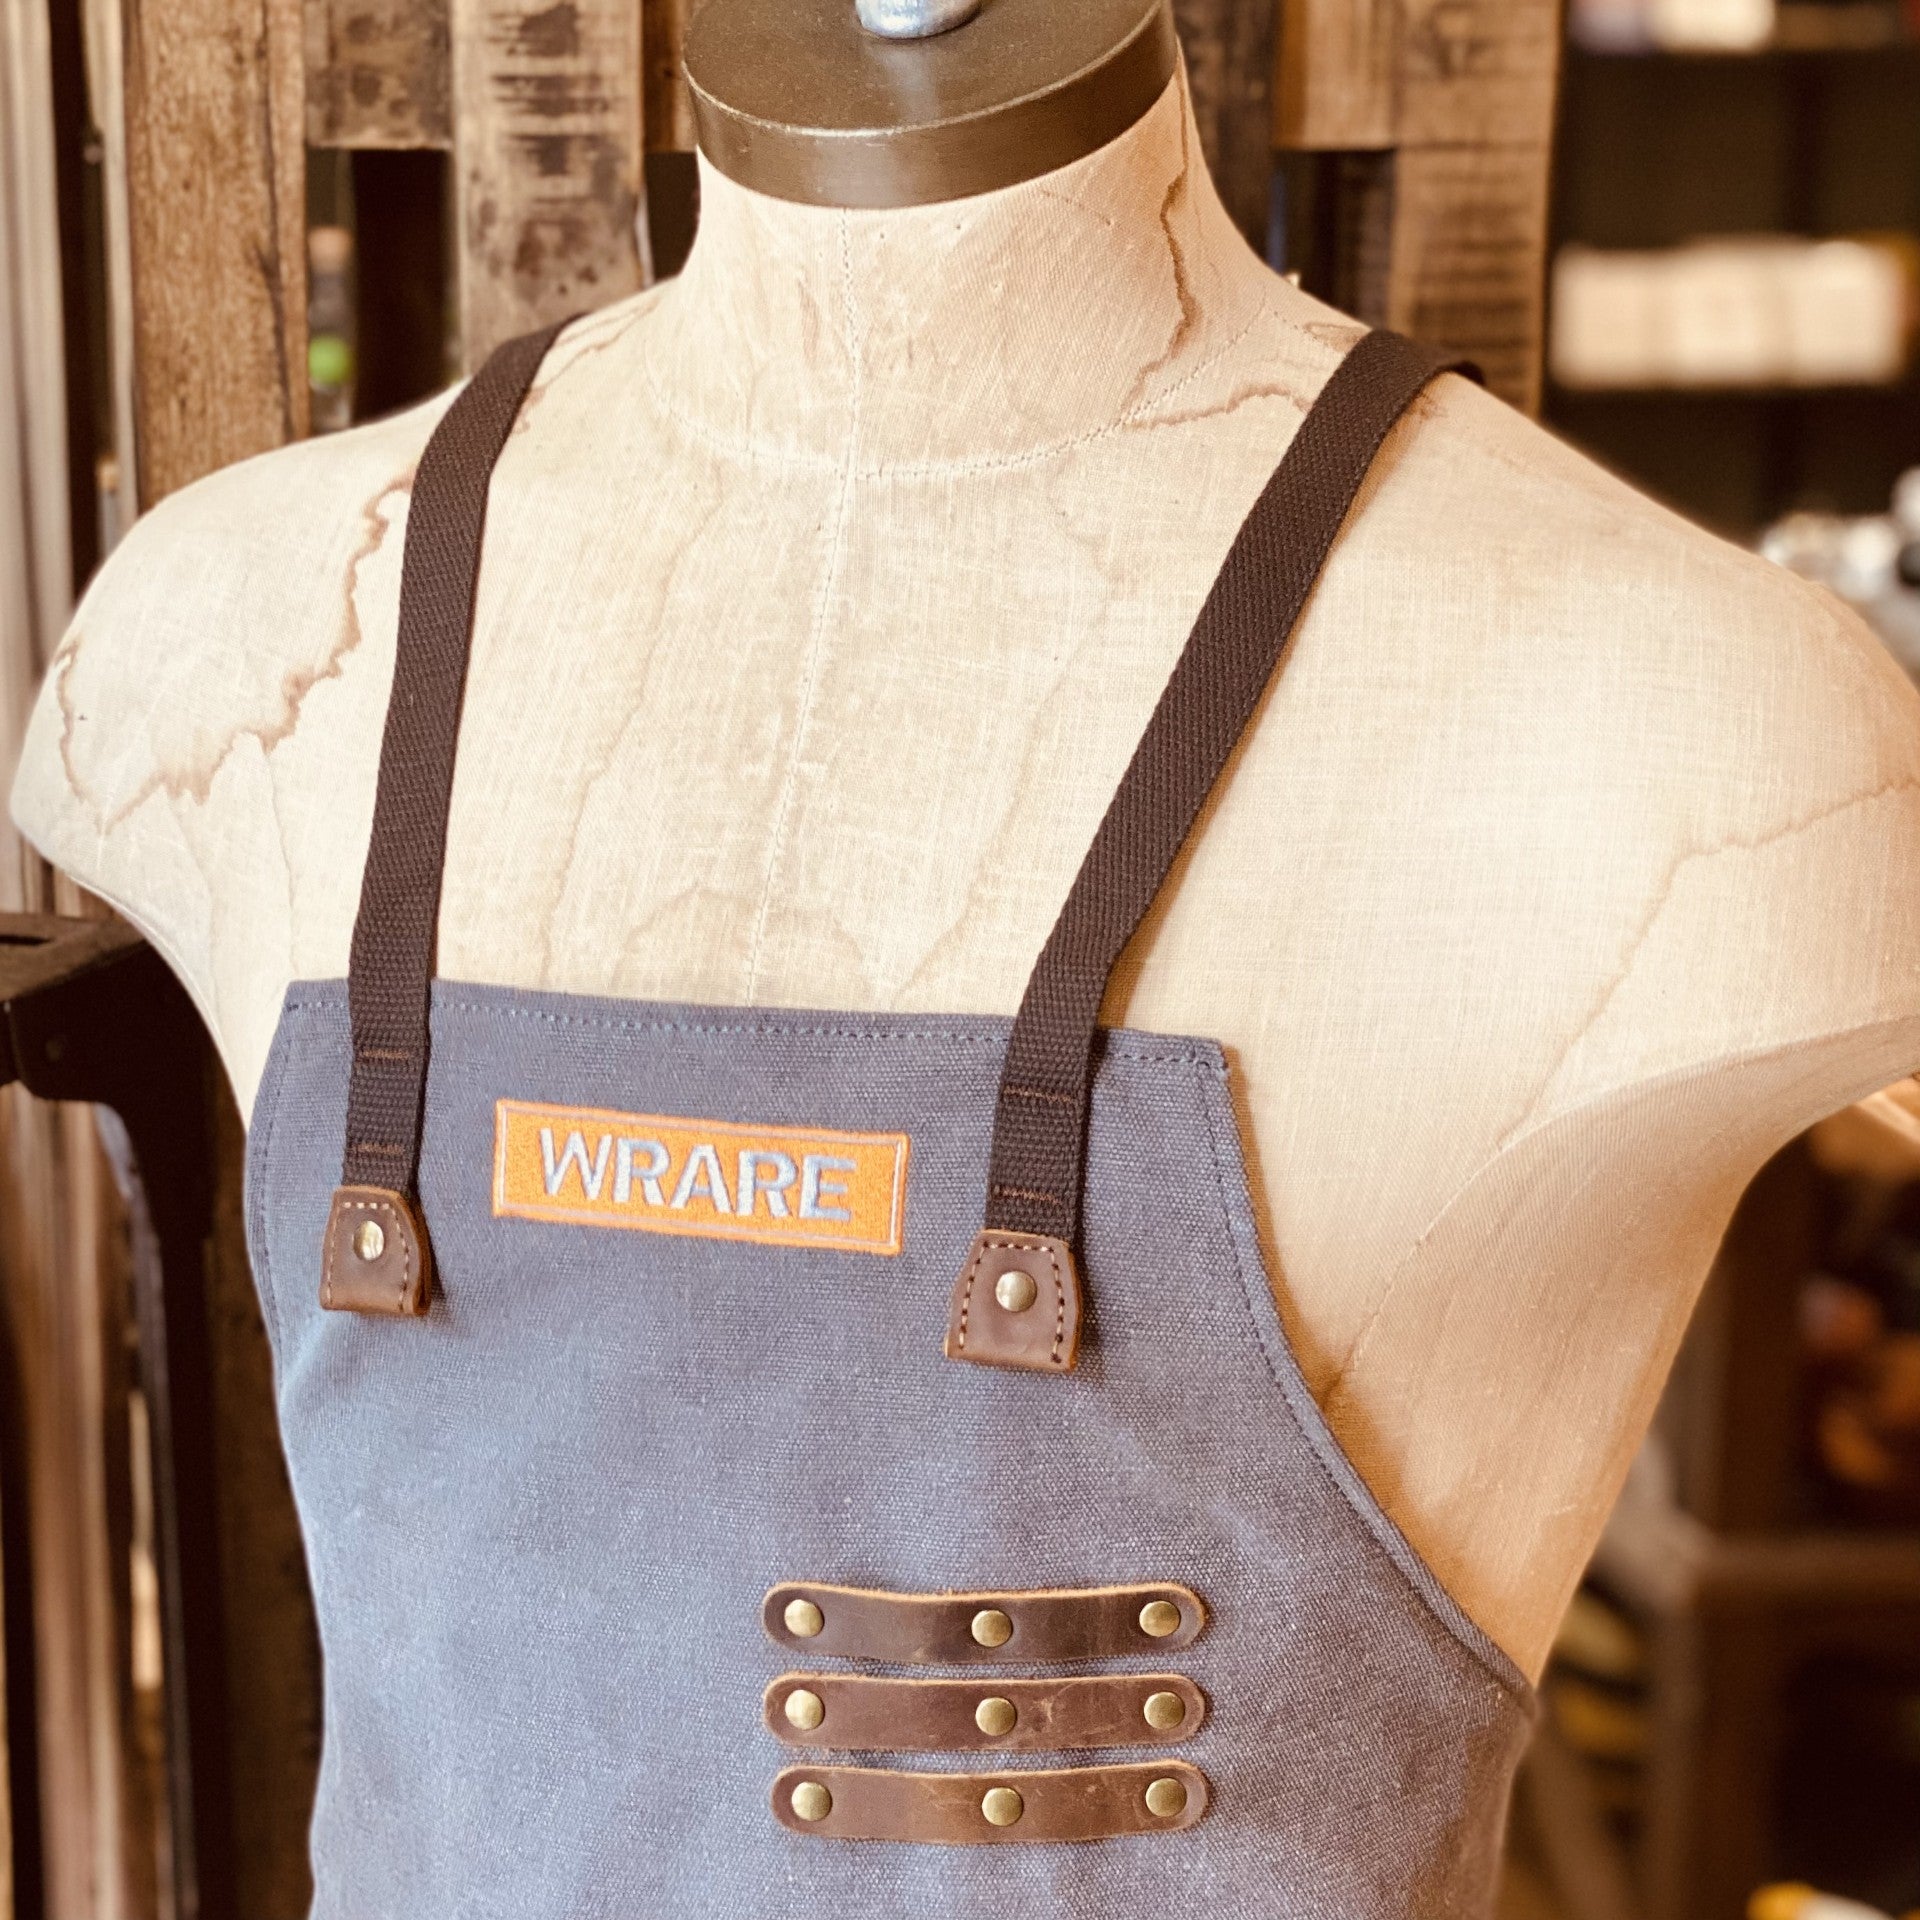 WRARE Canvas & Leather Apron